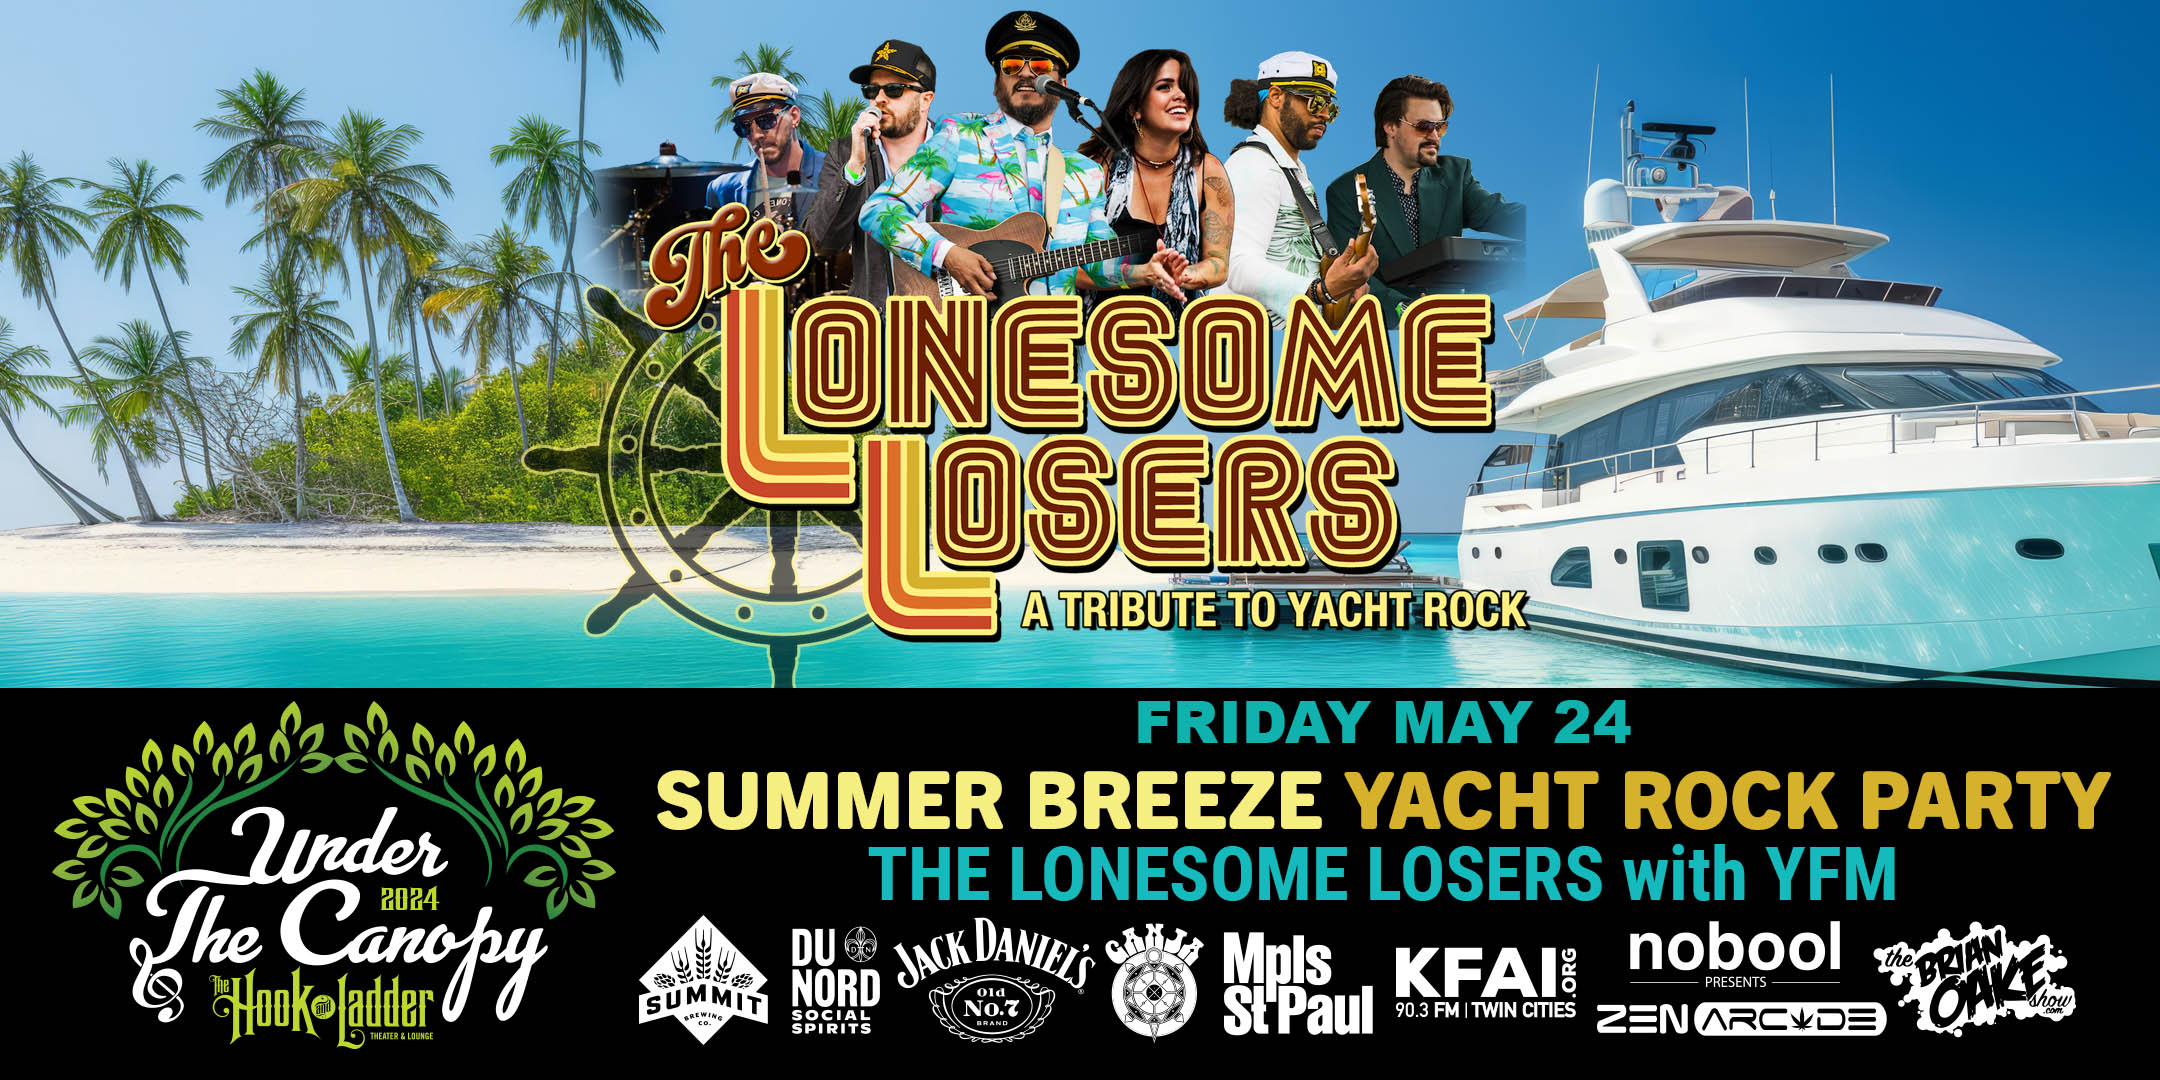 Summer Breeze Yacht Rock Party featuring The Lonesome Losers with guest YFM Friday, May 24 Under The Canopy at The Hook and Ladder Theater "An Urban Outdoor Summer Concert Series" Doors 6:00pm :: Music 7:00pm :: 21+ Reserved Seats: $35 GA: $19 ADV / $25 DOS *Does not include Fees